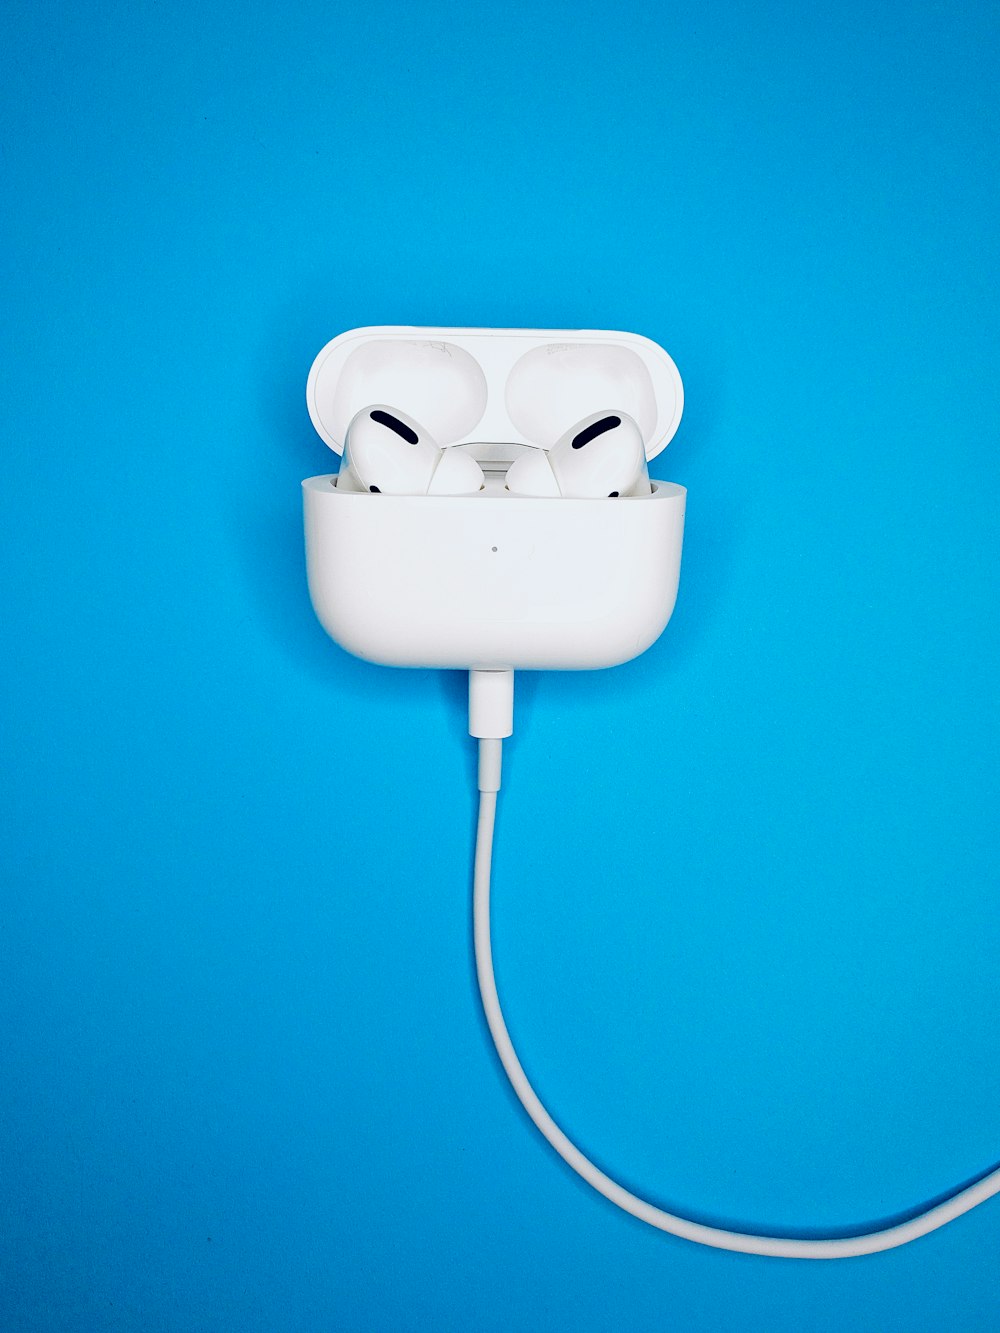 white apple charger on white electric socket